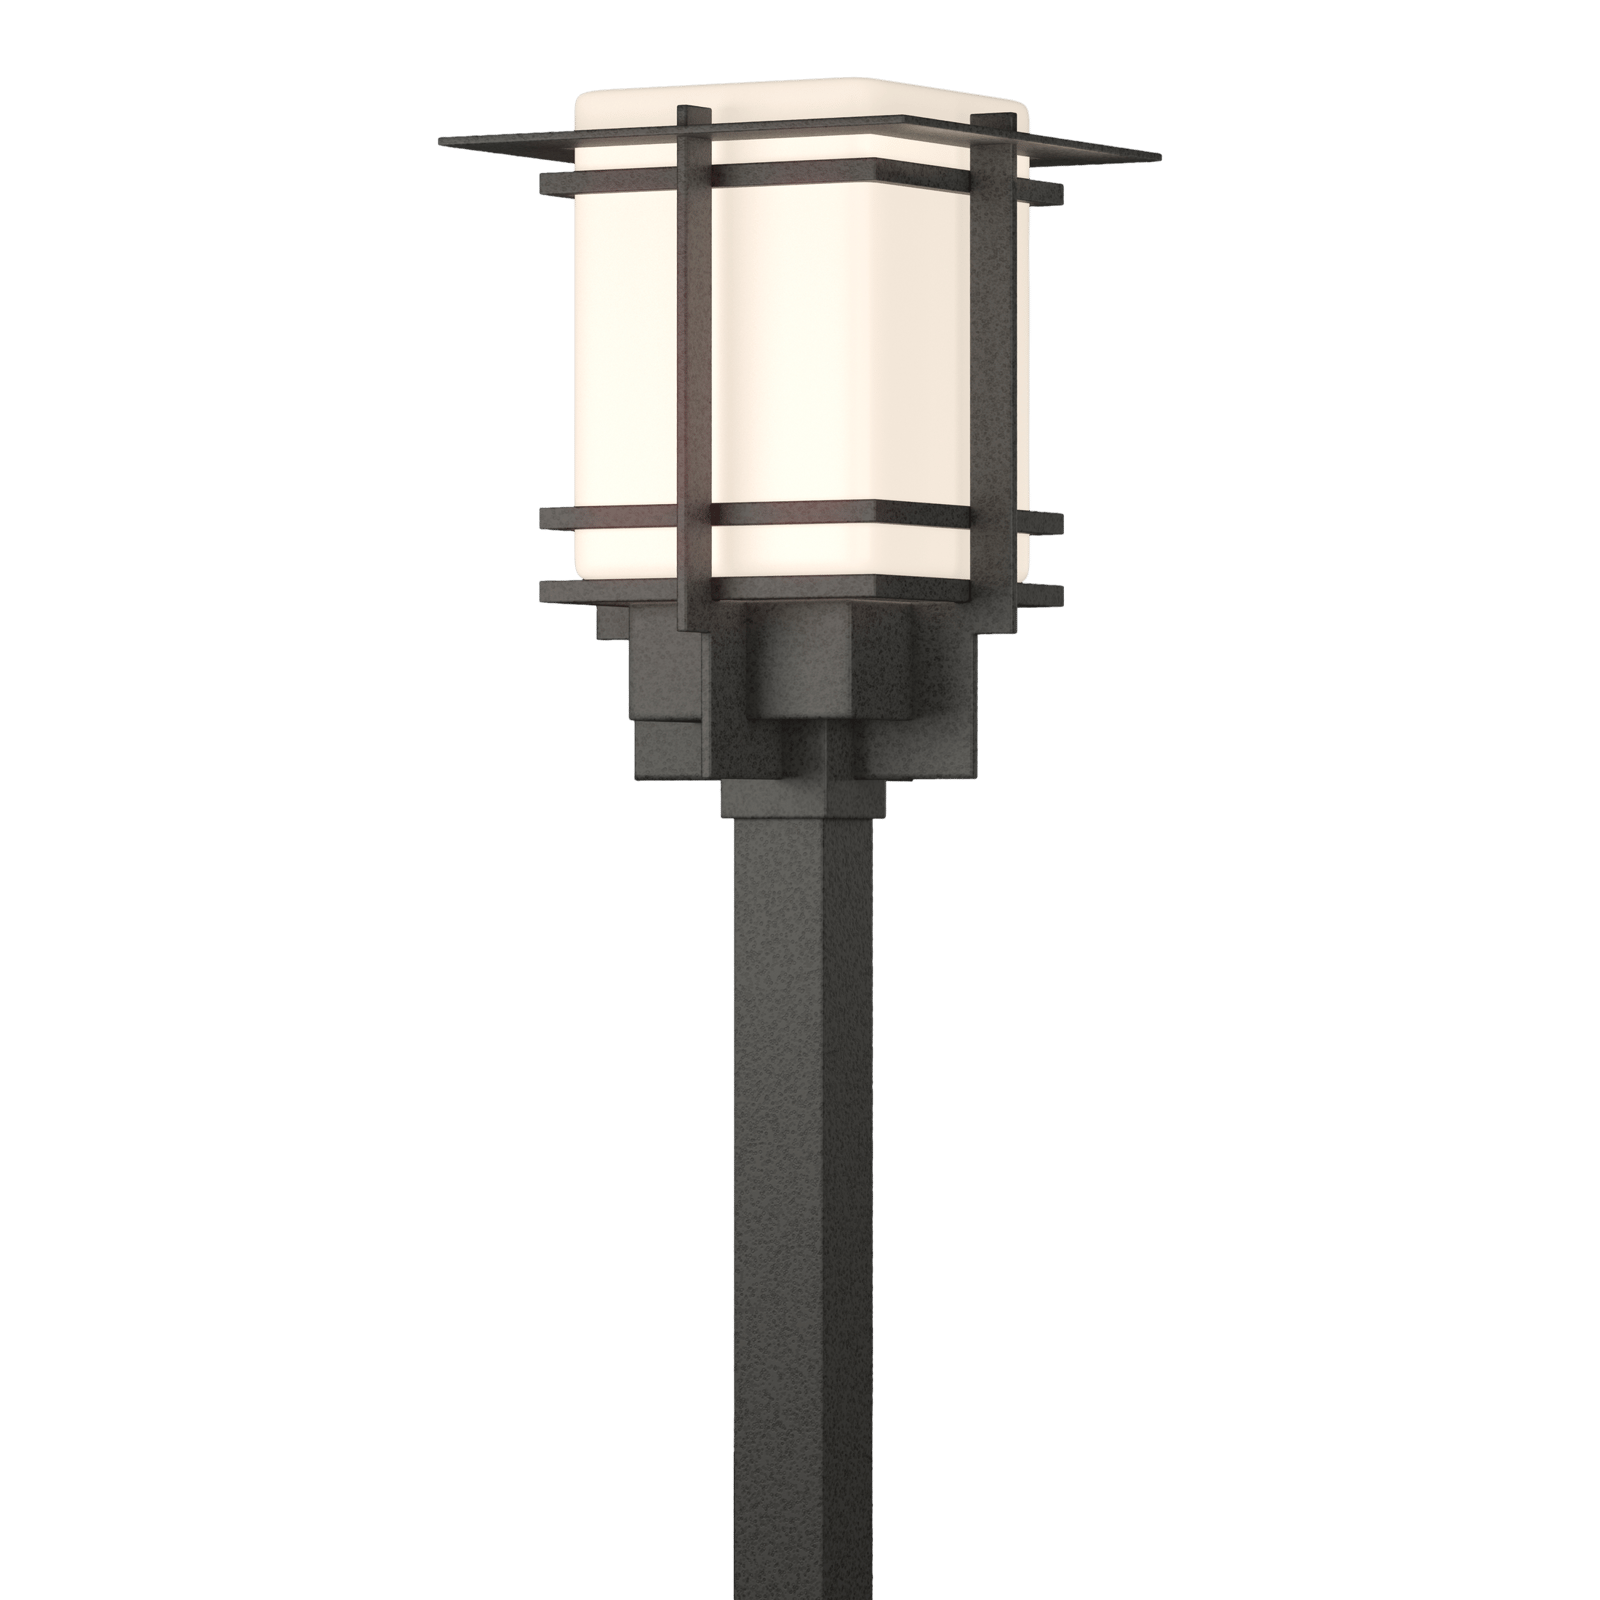 Hubbardton Forge Tourou Large Outdoor Post Light Outdoor l Post/Pier Mounts Hubbardton Forge Coastal Natural Iron Opal Glass (GG) 